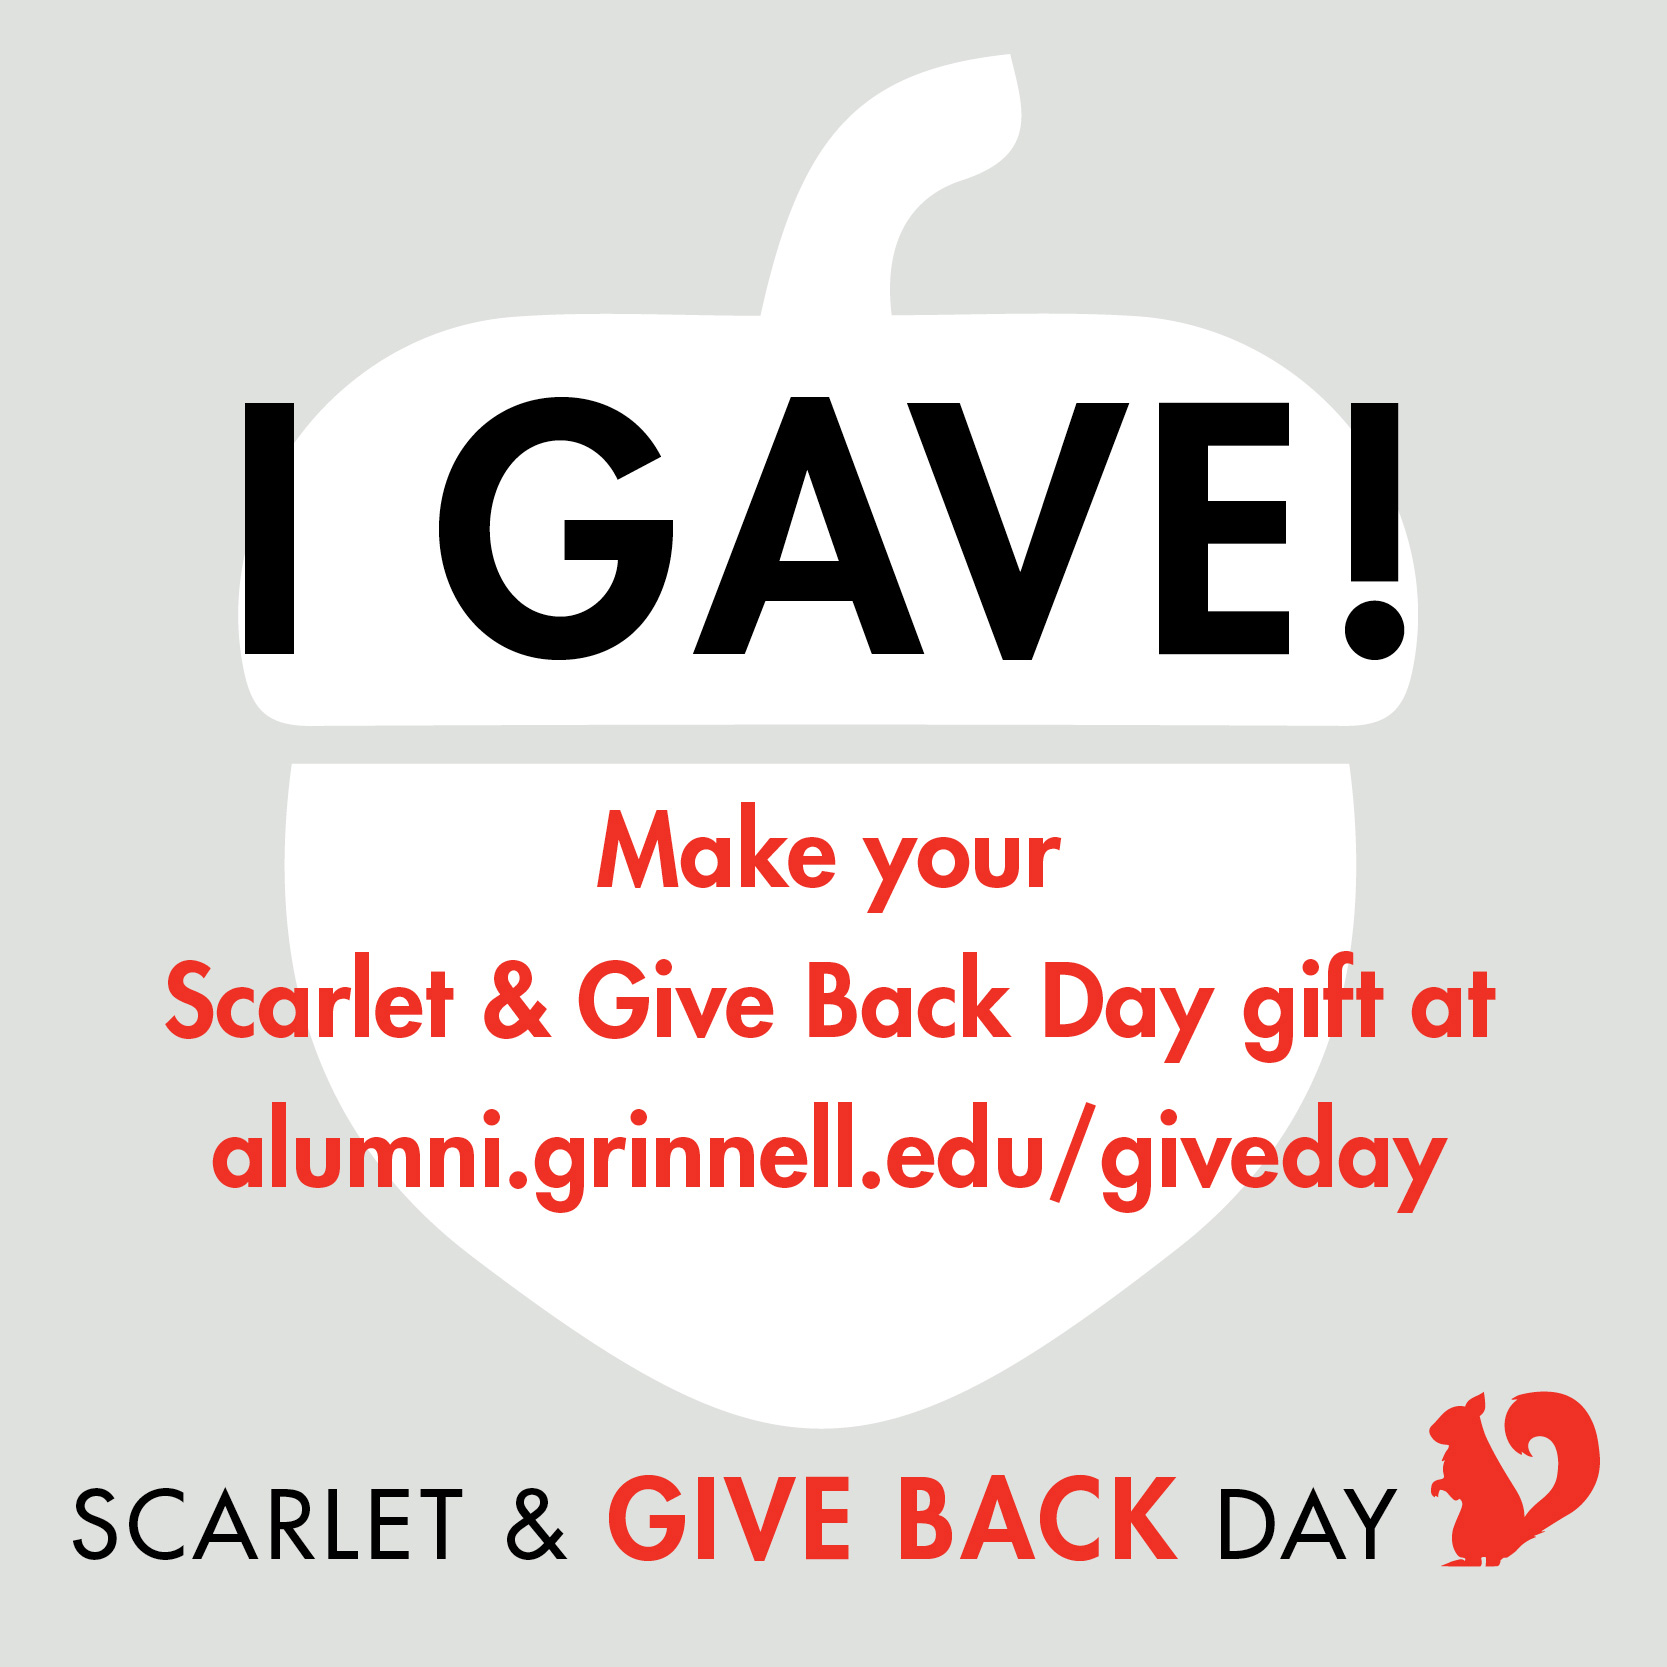 Background: A white acorn icon on a gray background. Text: I GAVE! make your Scarlet & Give Back Day gift of alumni.grinnell.edu/giveback